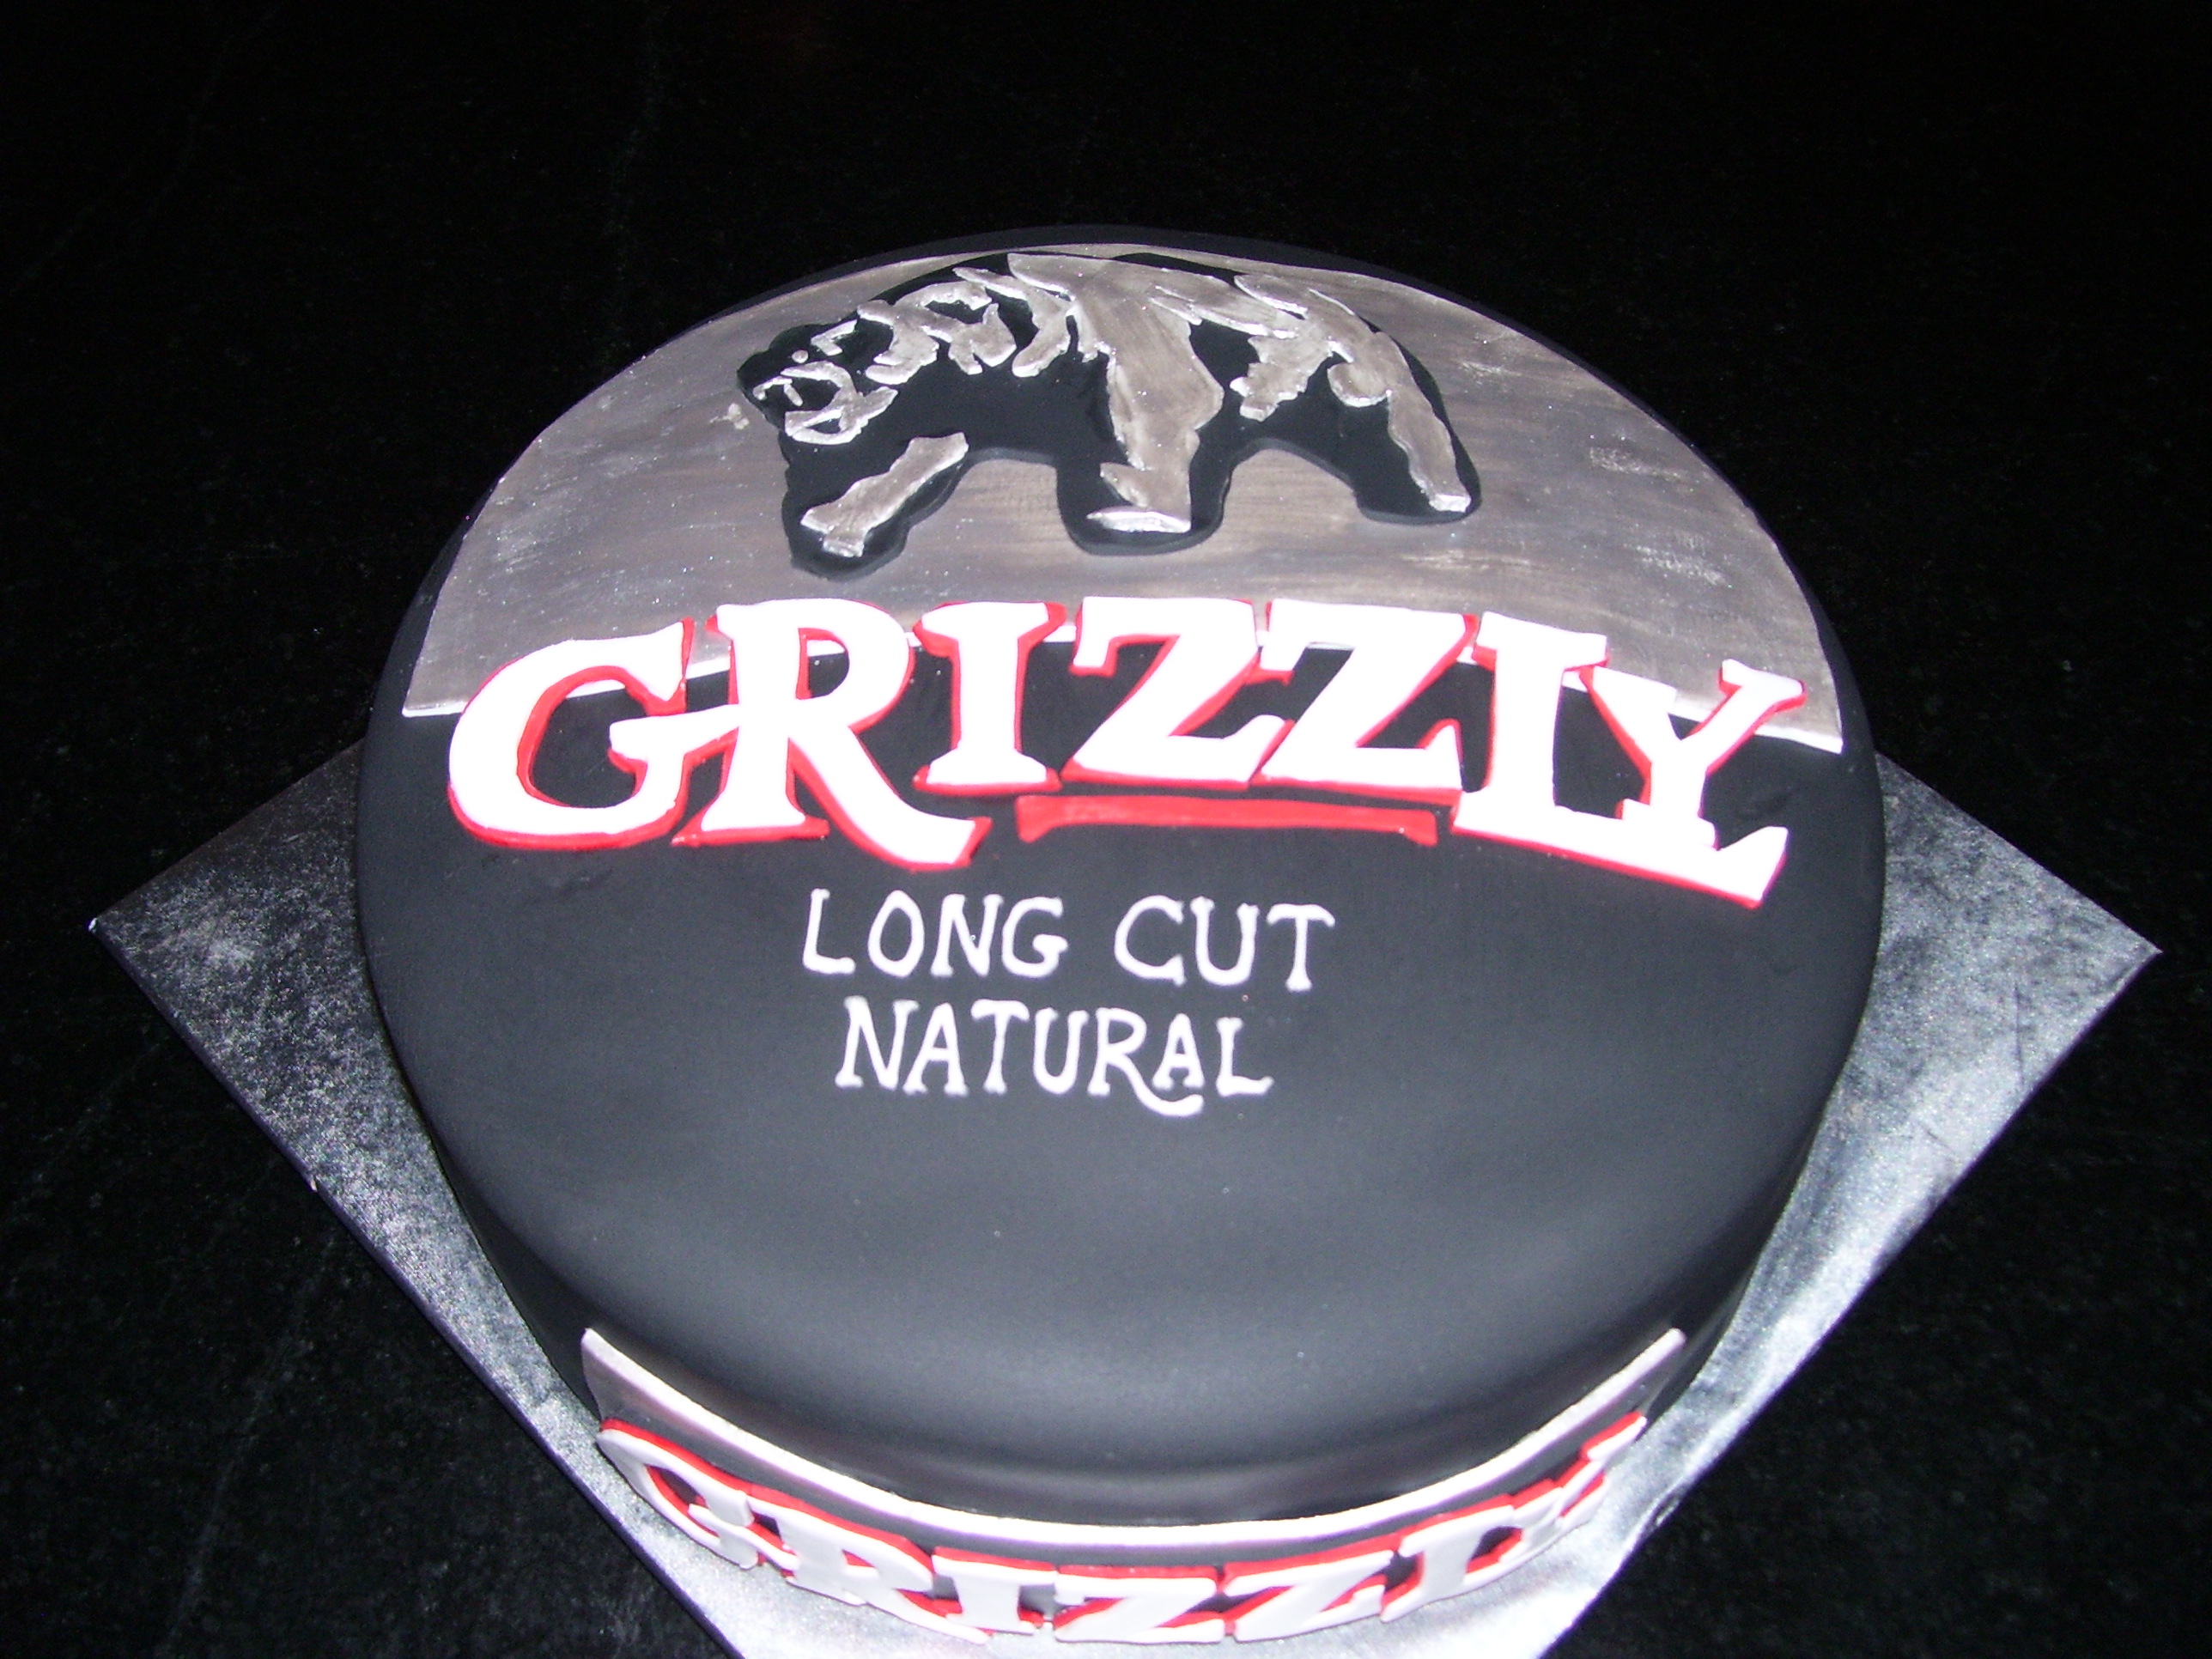 Grizzly Tobacco